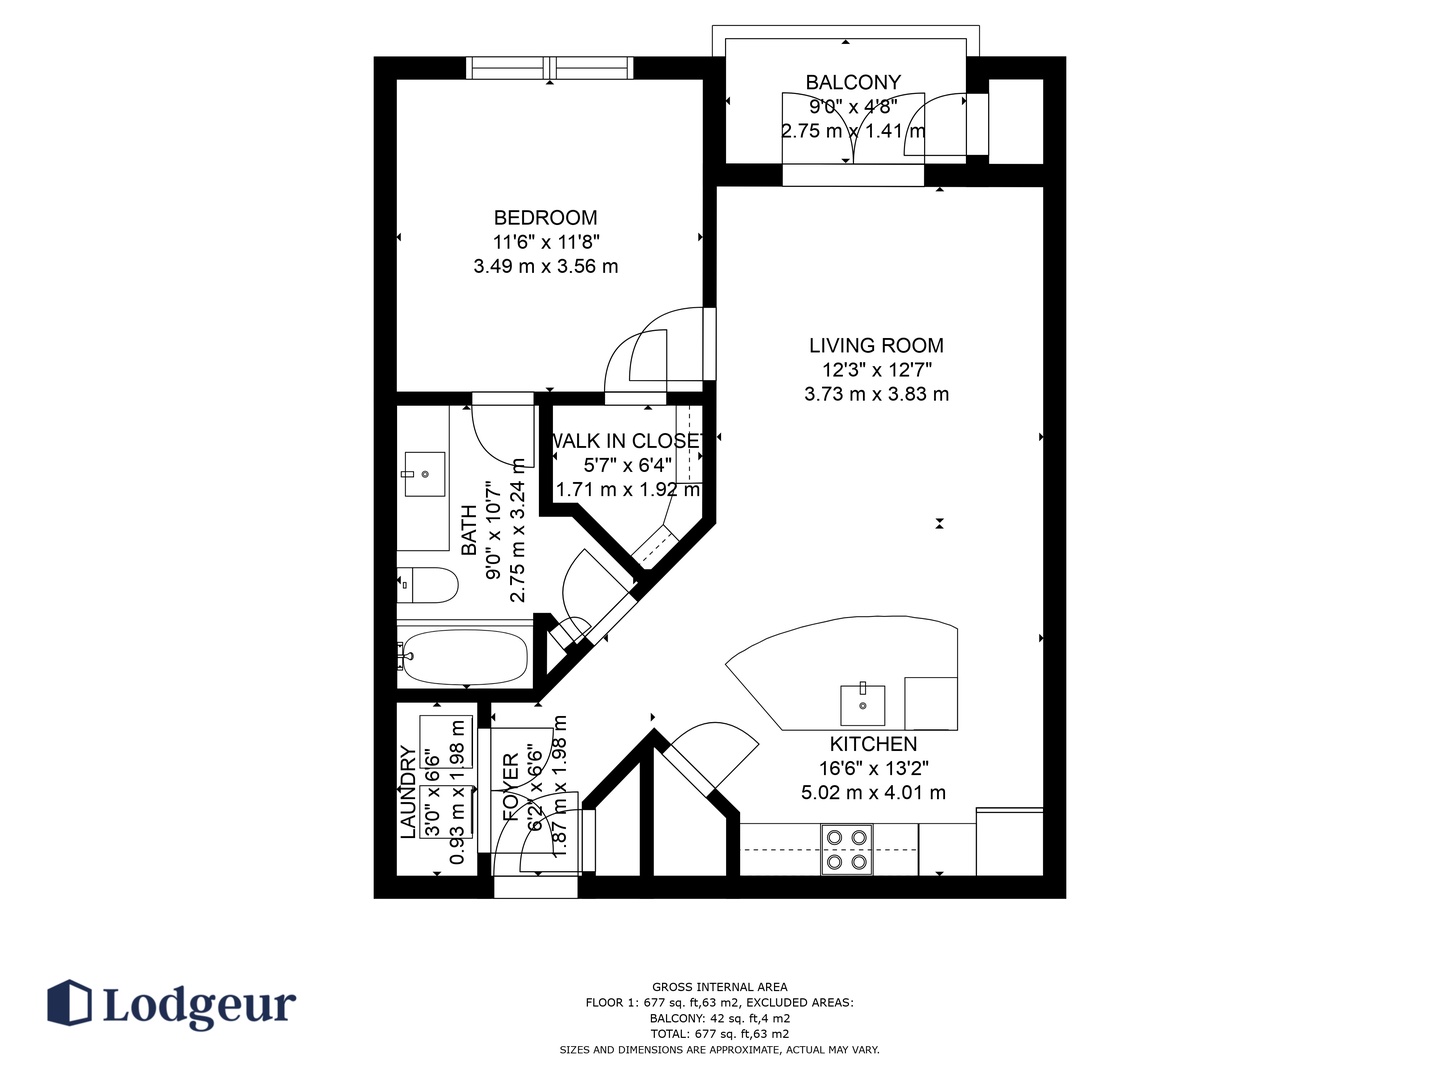 Explore the spacious and versatile living space with this open-concept floor plan.